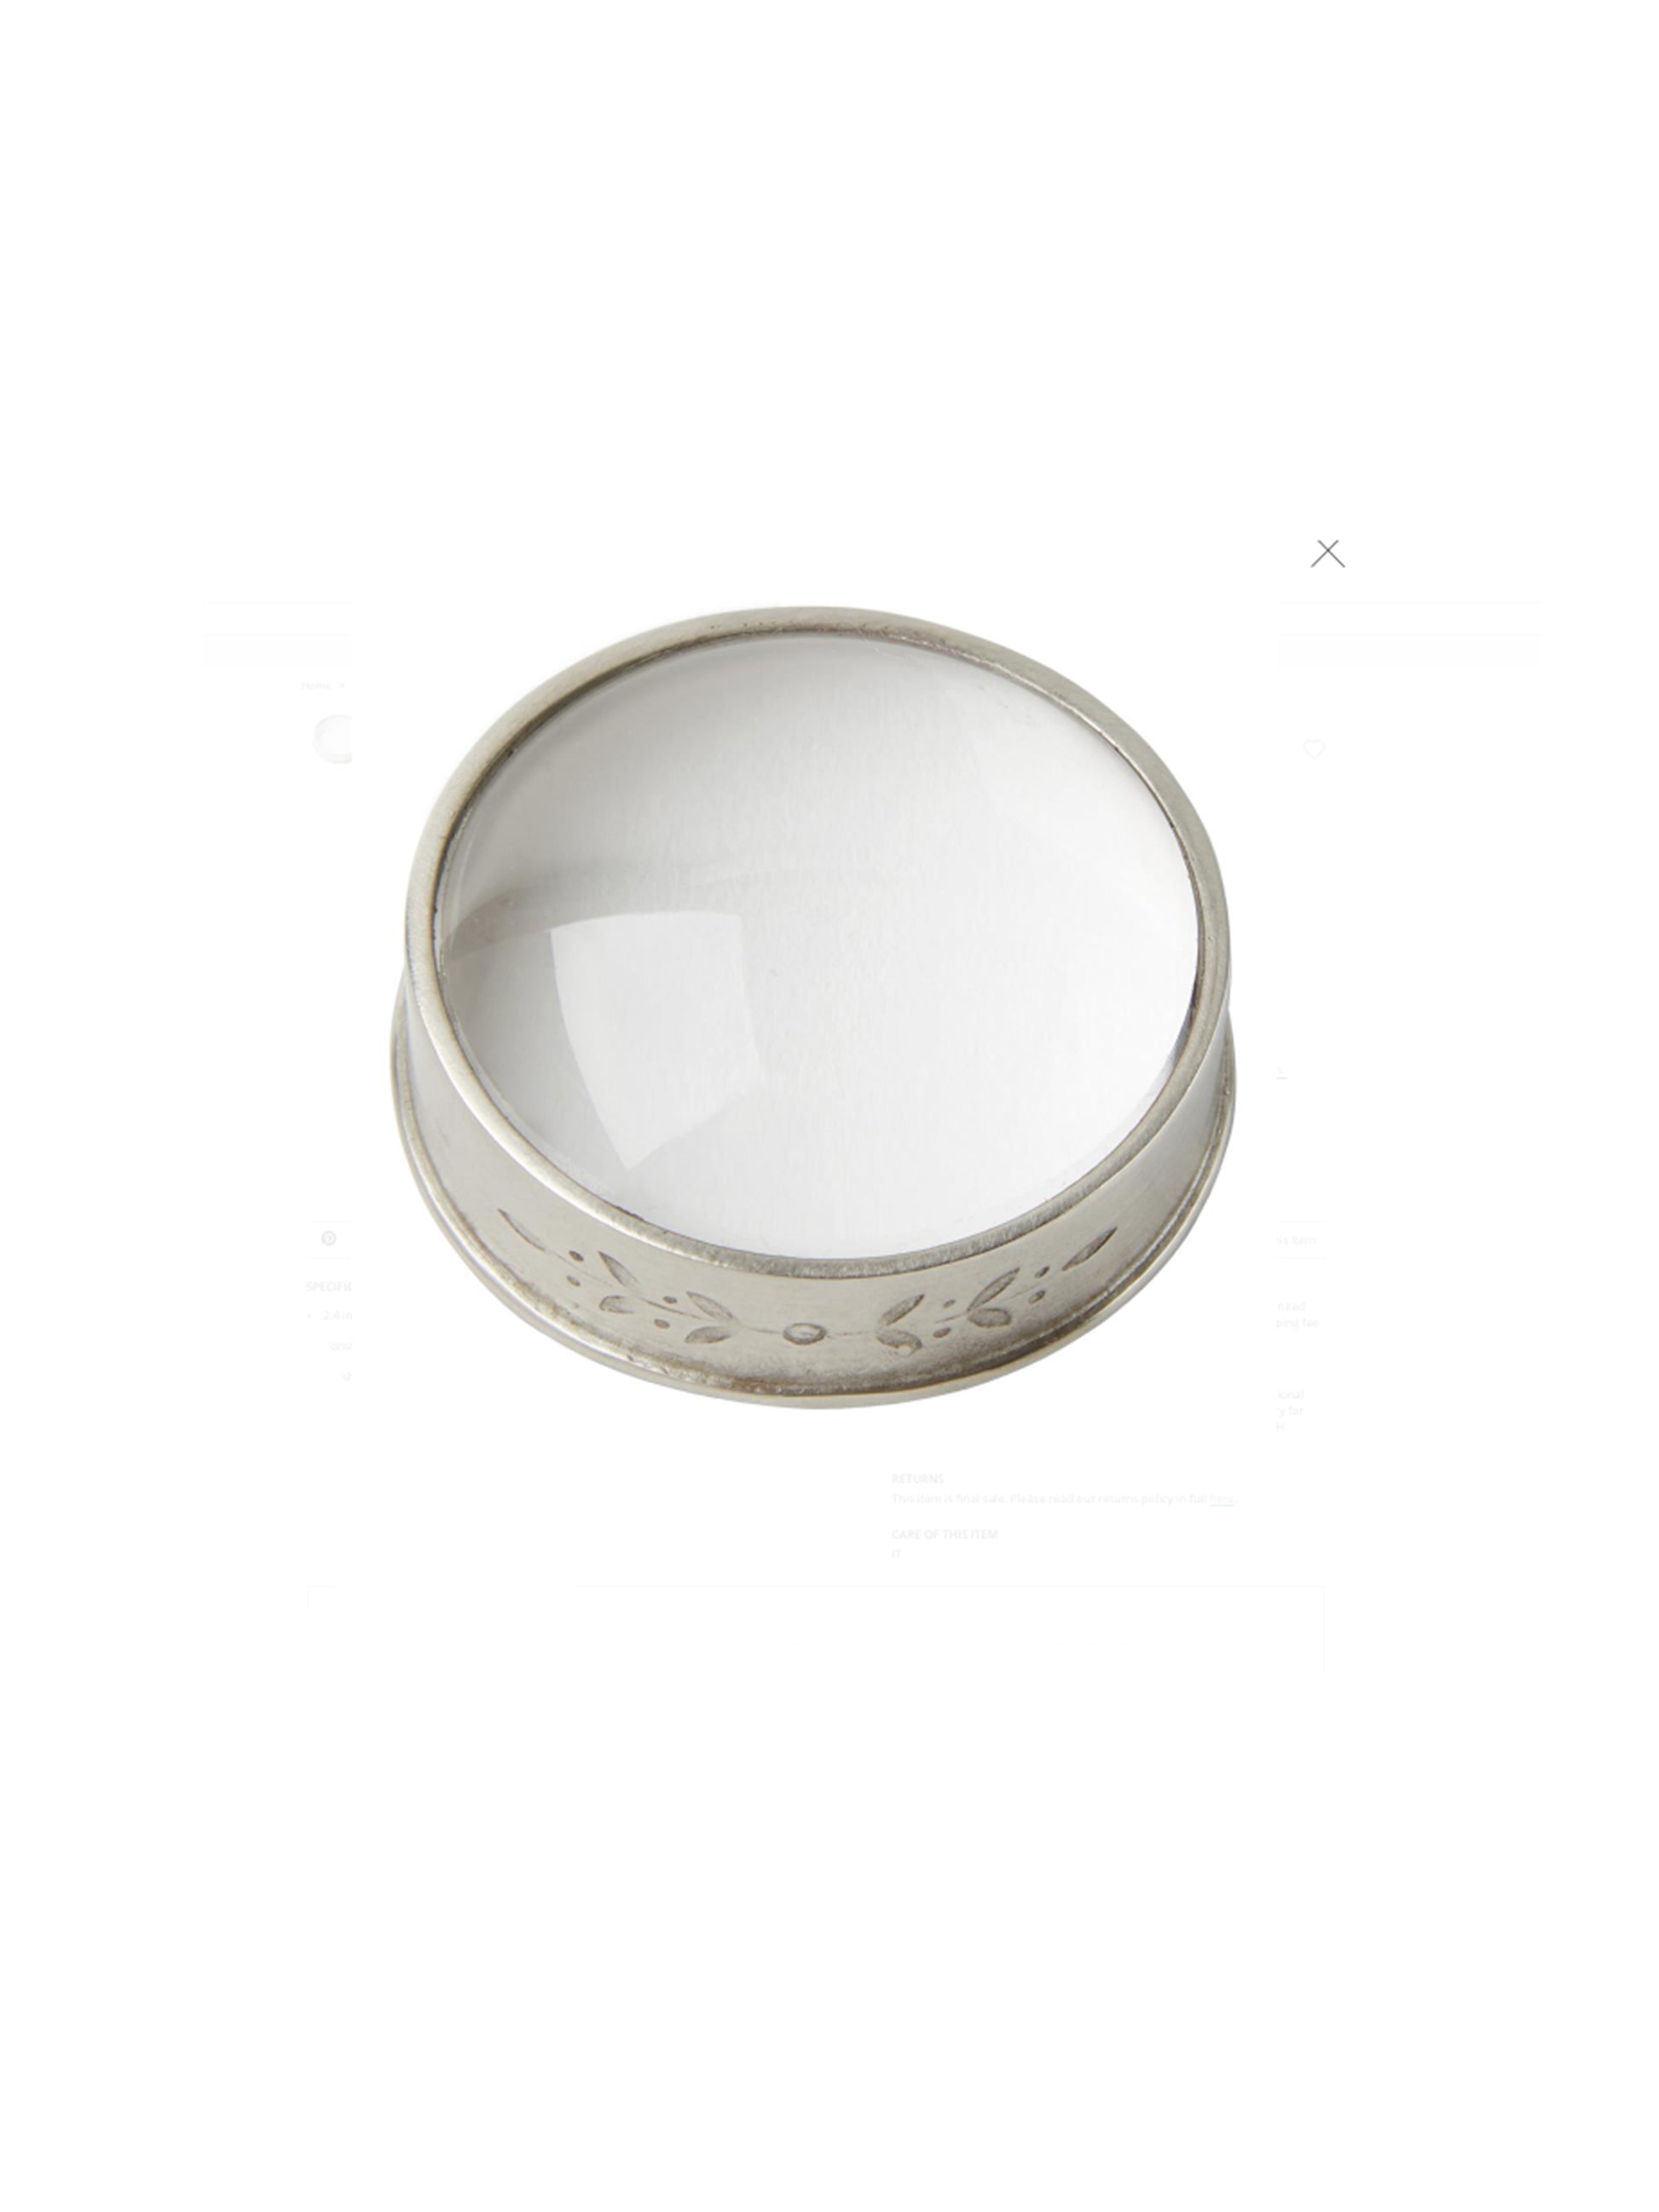 Shop the MATCH Pewter Garda Small Magnifying Glass at Weston Table